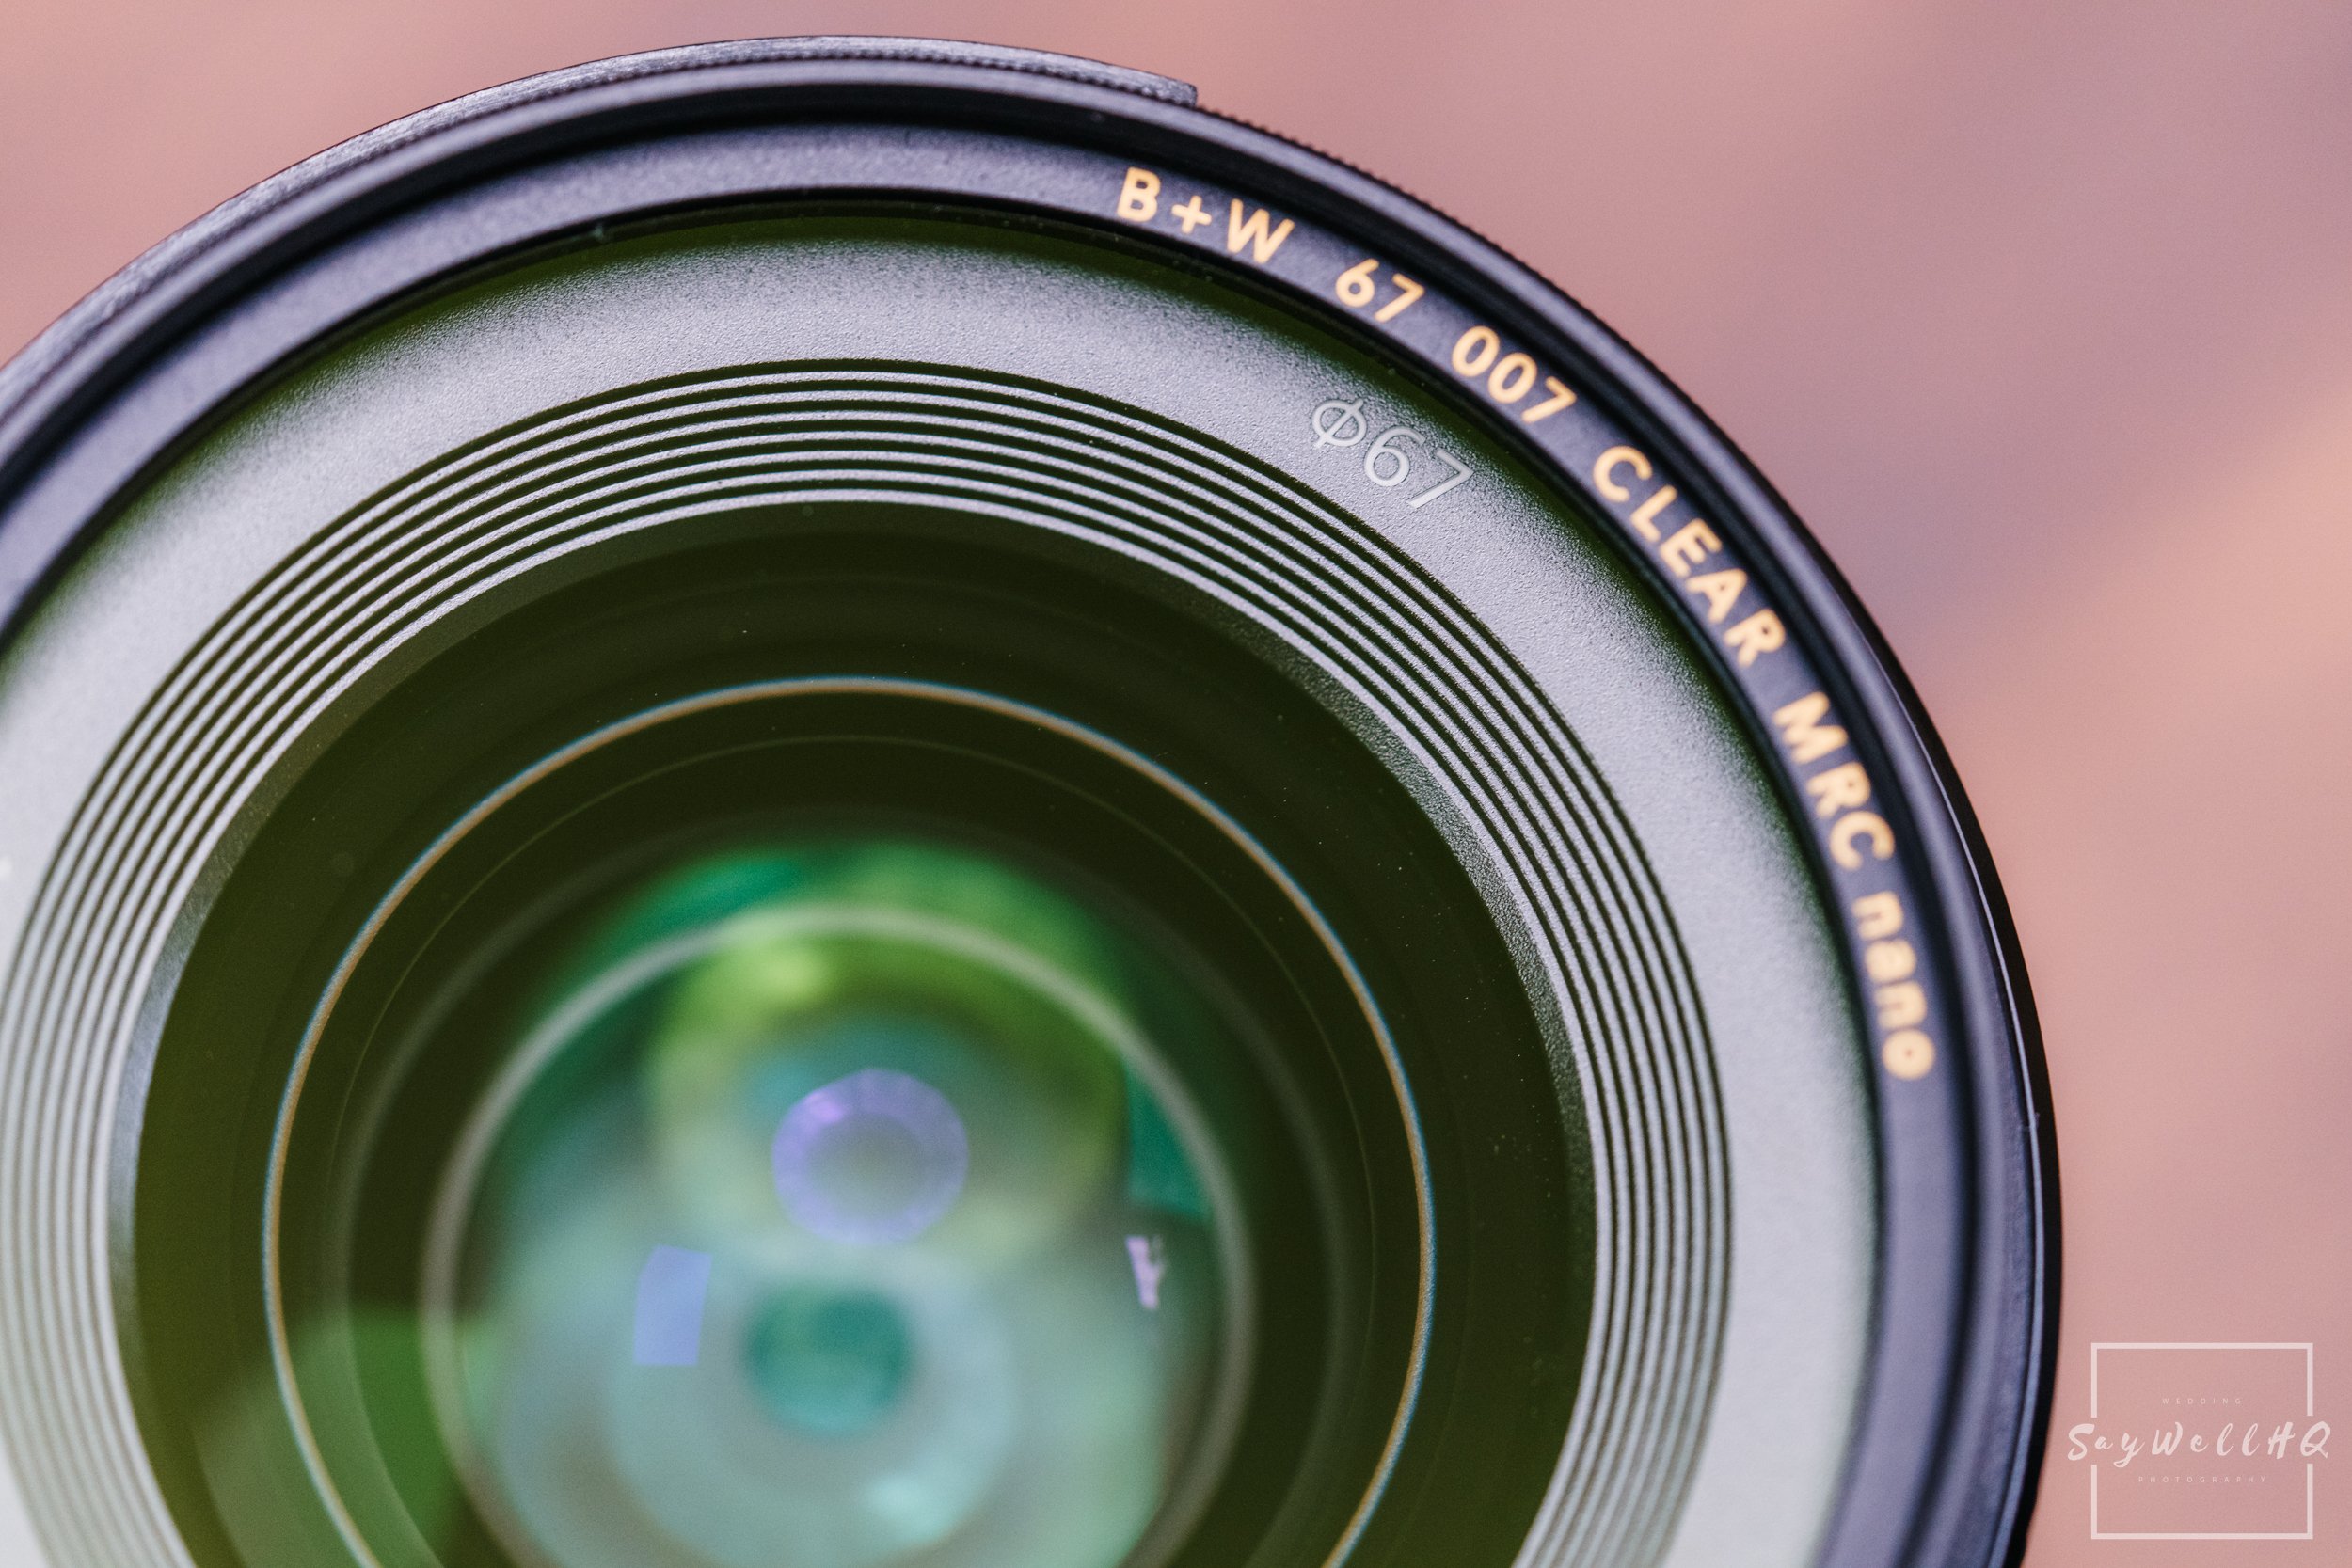 Sony Alpha 35mm F 1.4 GM Lens for wedding photography | Image showing the filter thread size of the lens